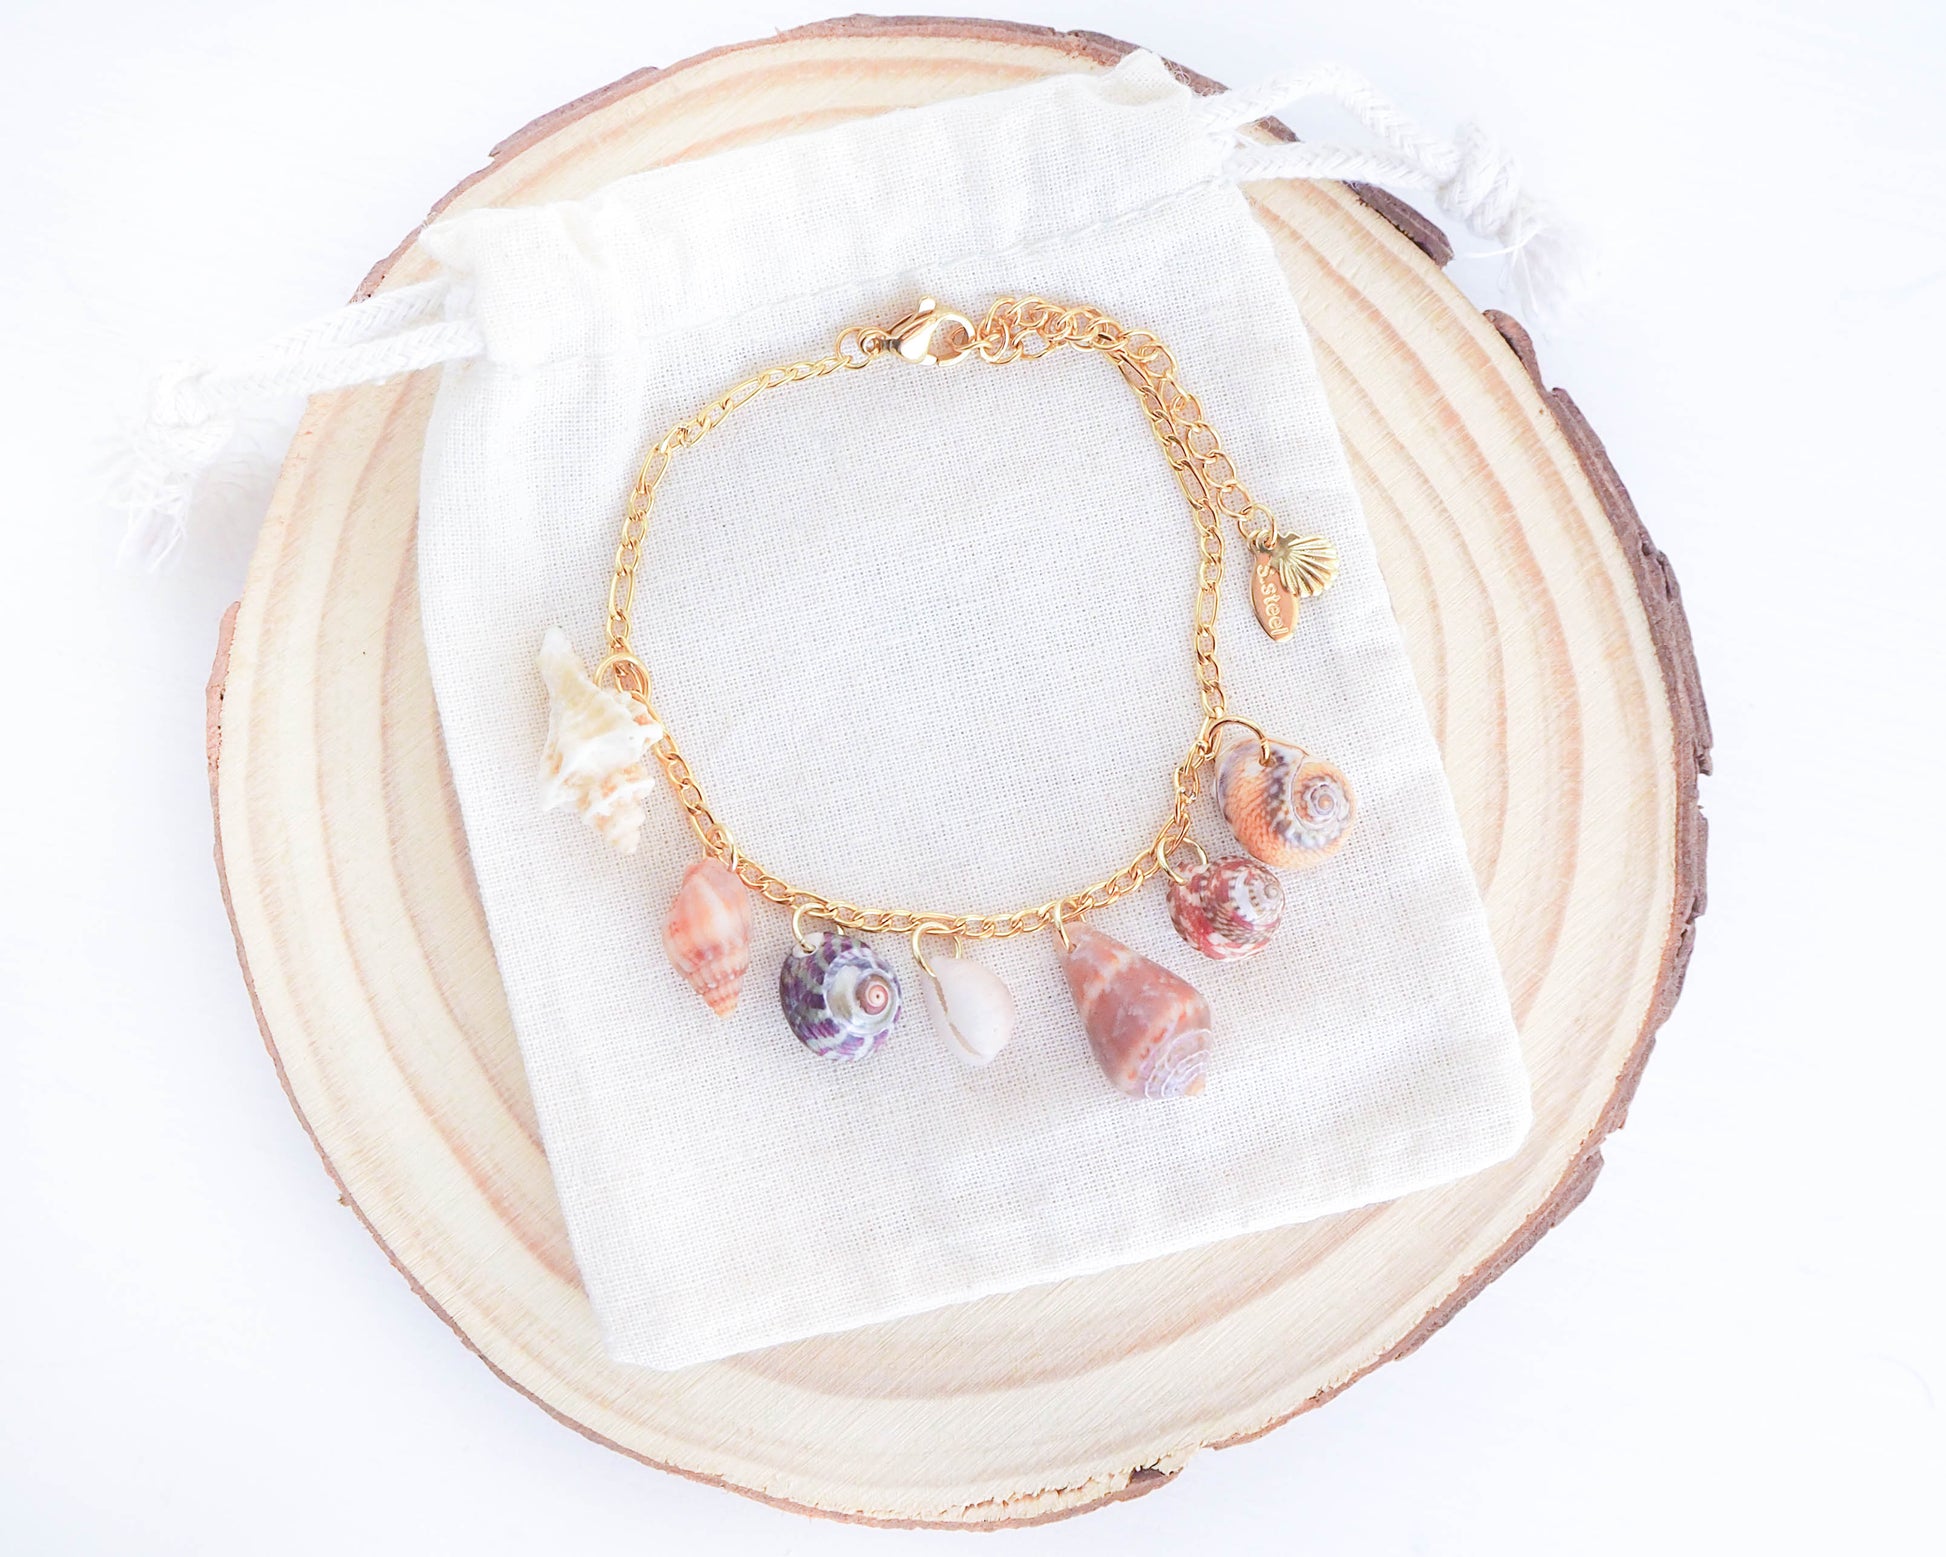 Tiny Shells Gold Charm Bracelet: ocean-inspired jewelry from Portugal